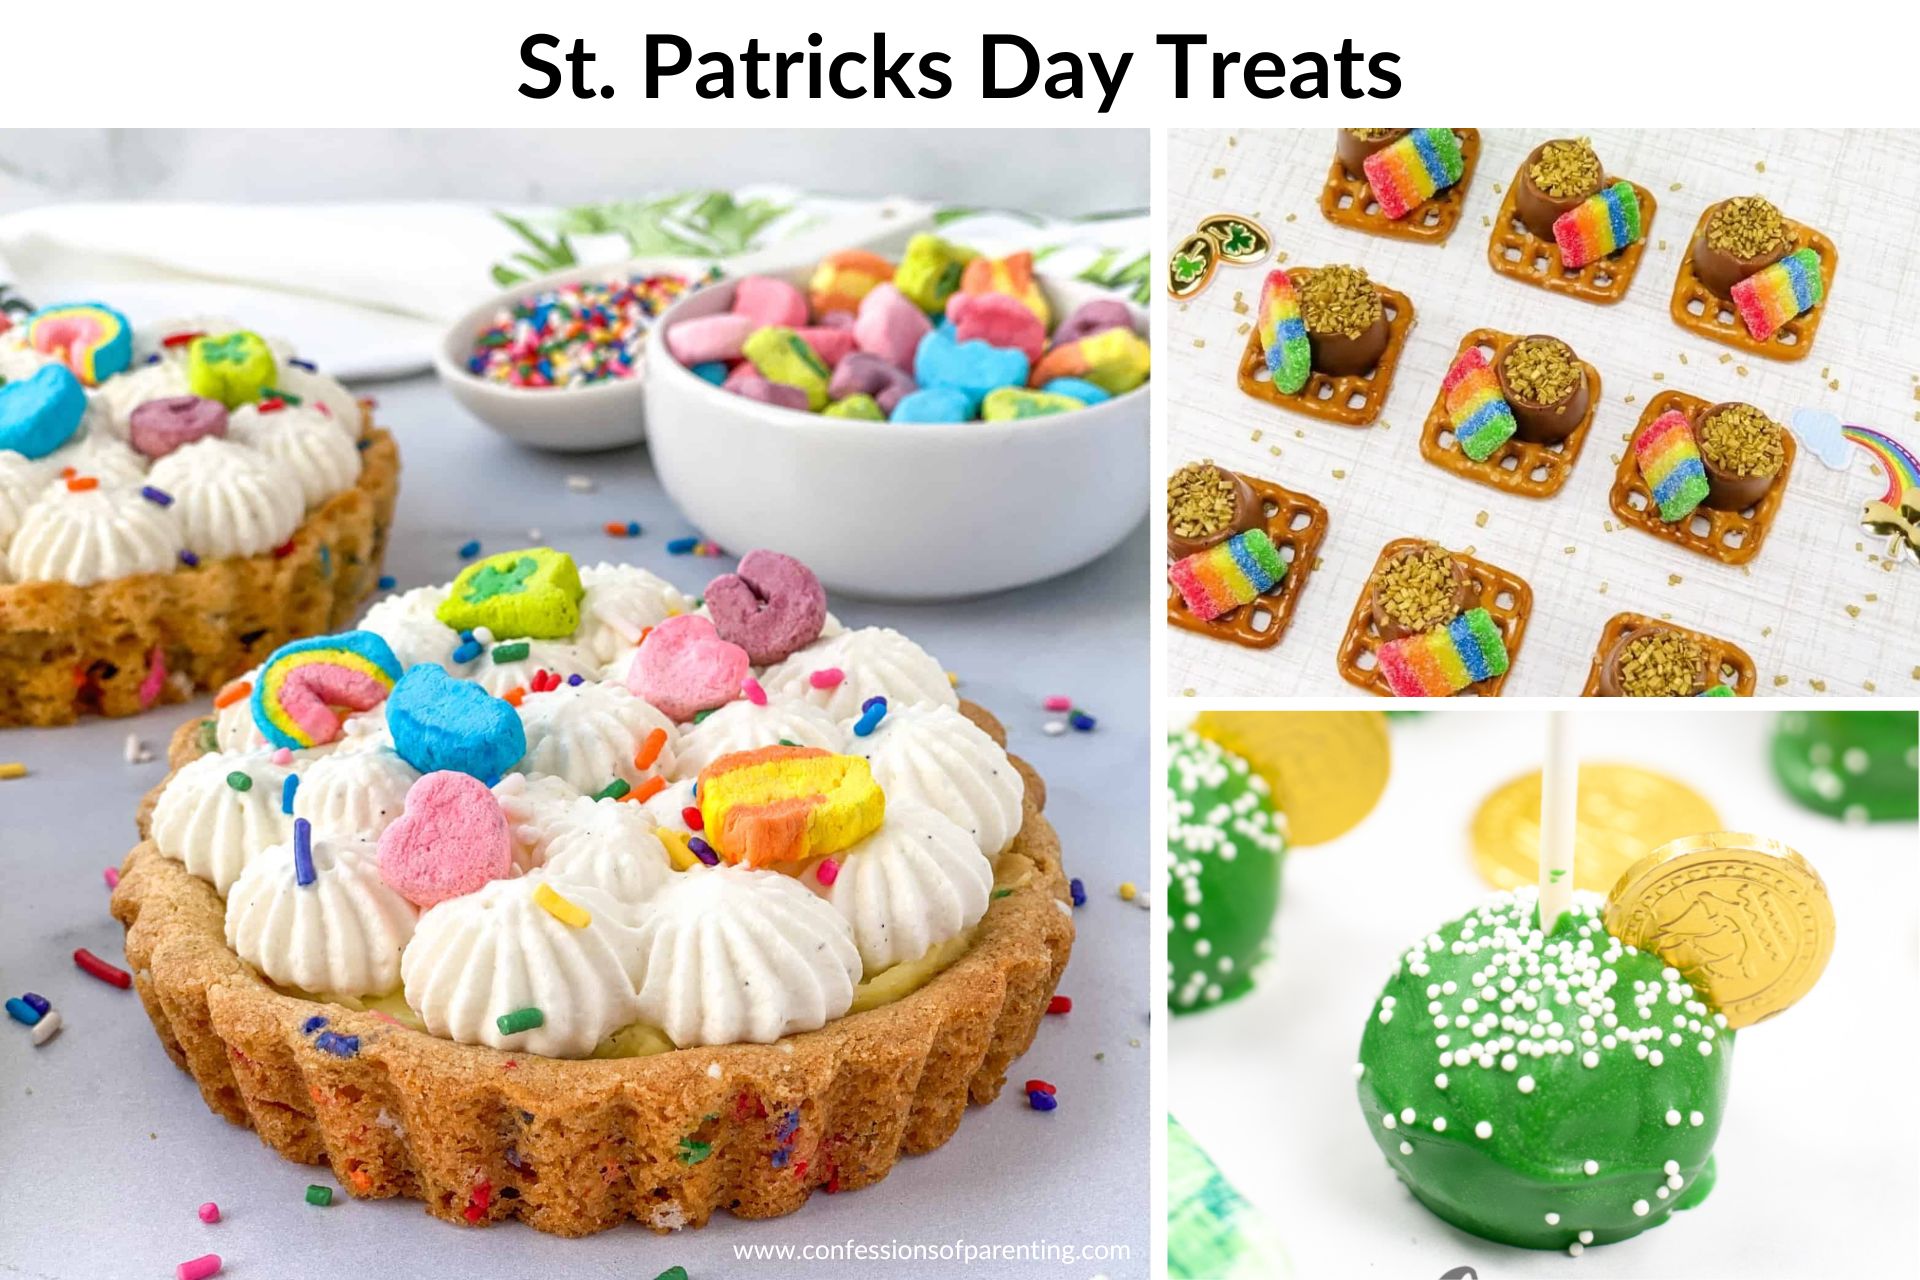 St.Patricks Day Treats featured images